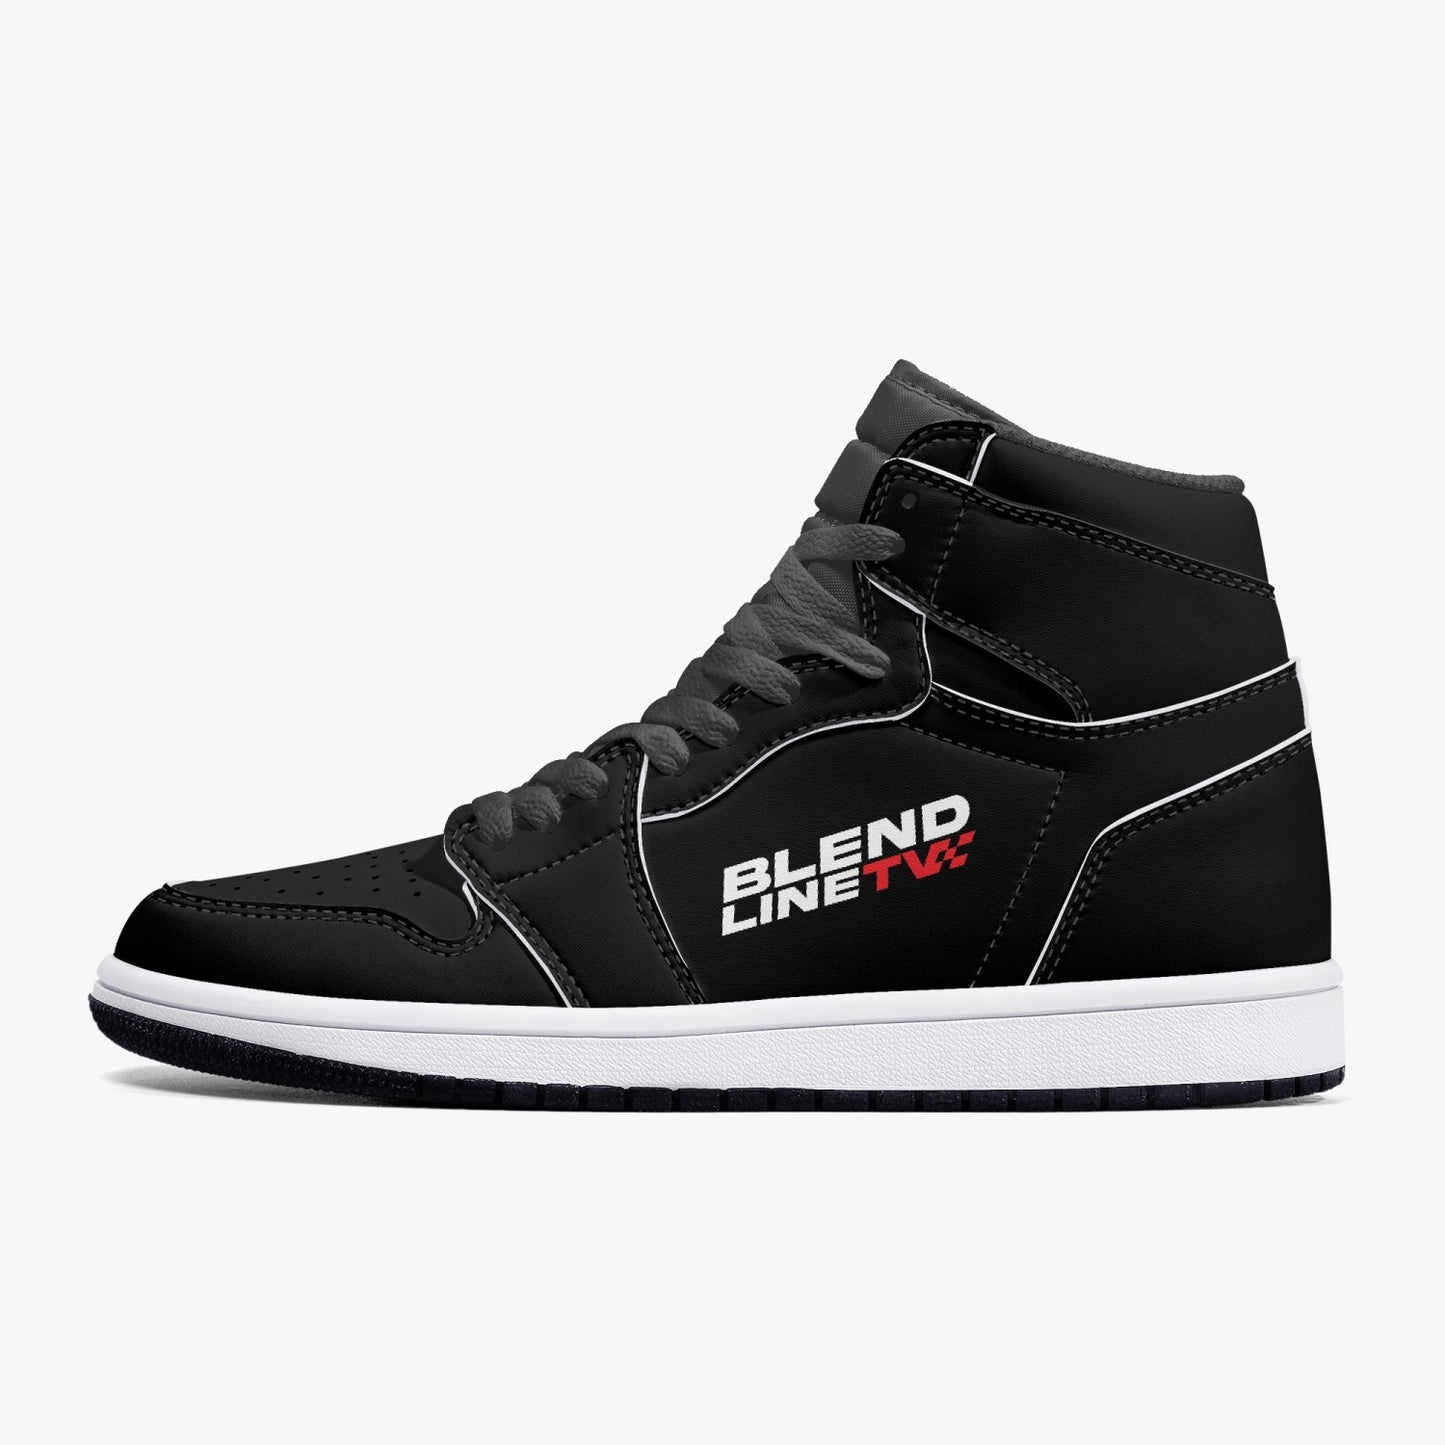 BLENDLINE TV High-Top Leather Sneakers - carbon